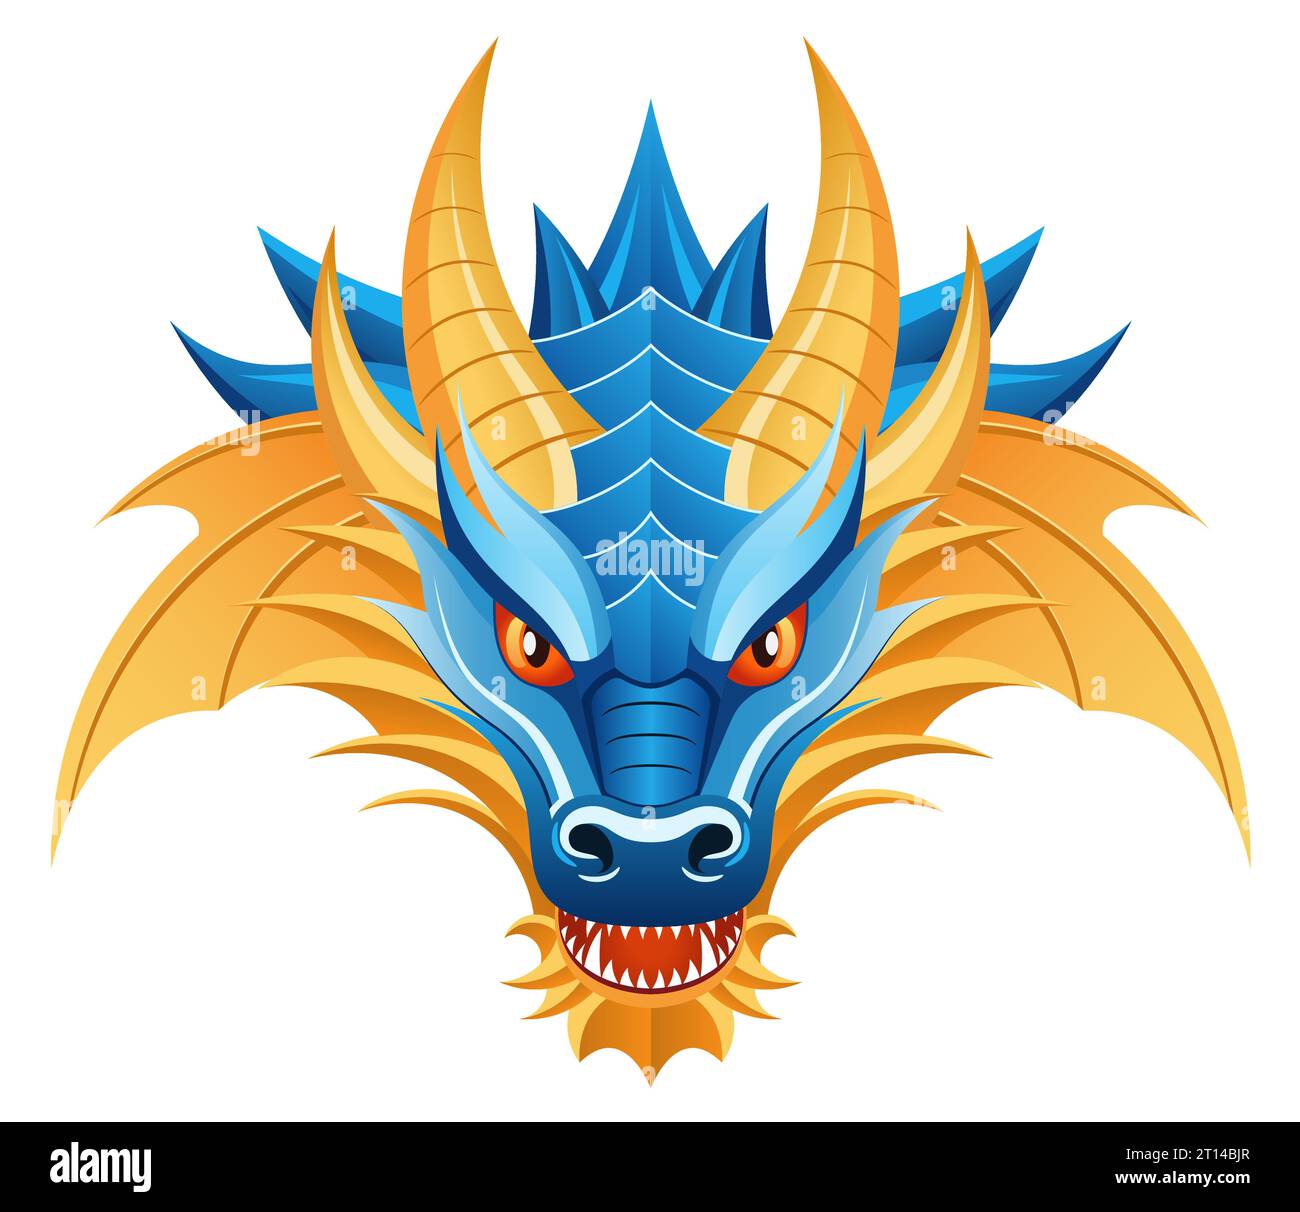 Vector illustration of dragons head in blue and yellow colors. Isolated dragon on white background, symbol of the year 2024. Stock Vector